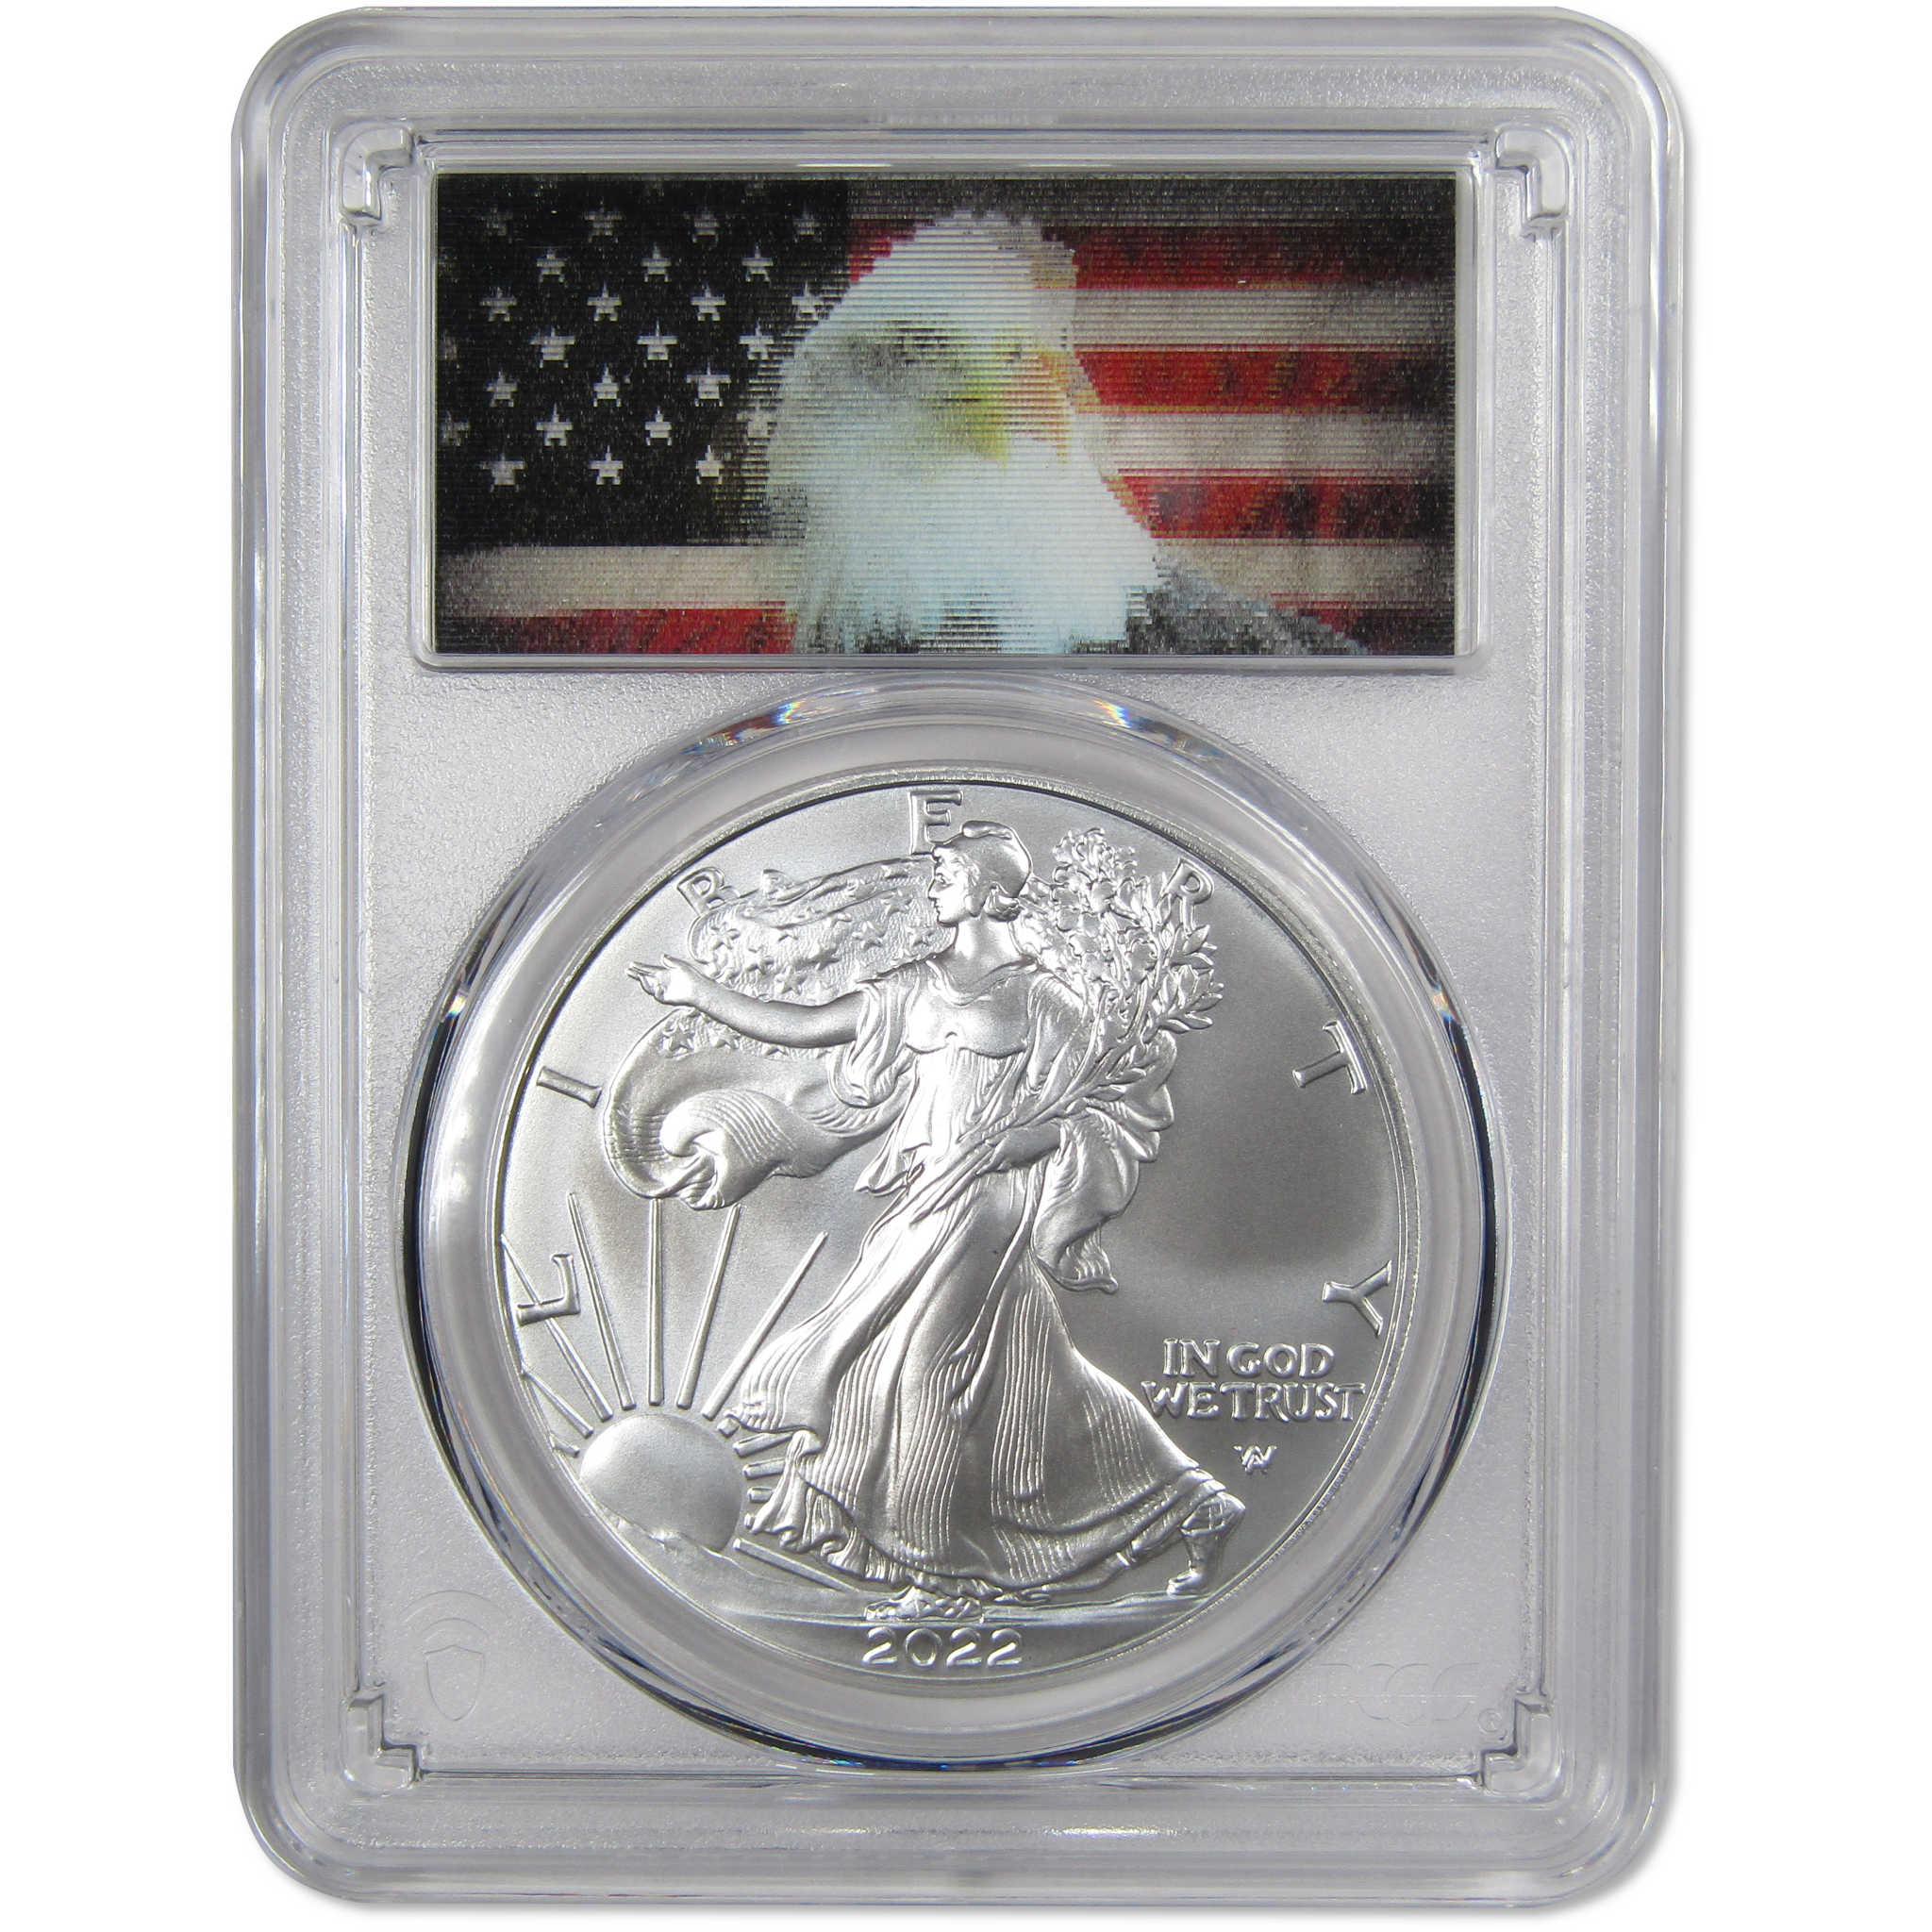 Invest in Bullion Coins | Profile Coins & Collectibles